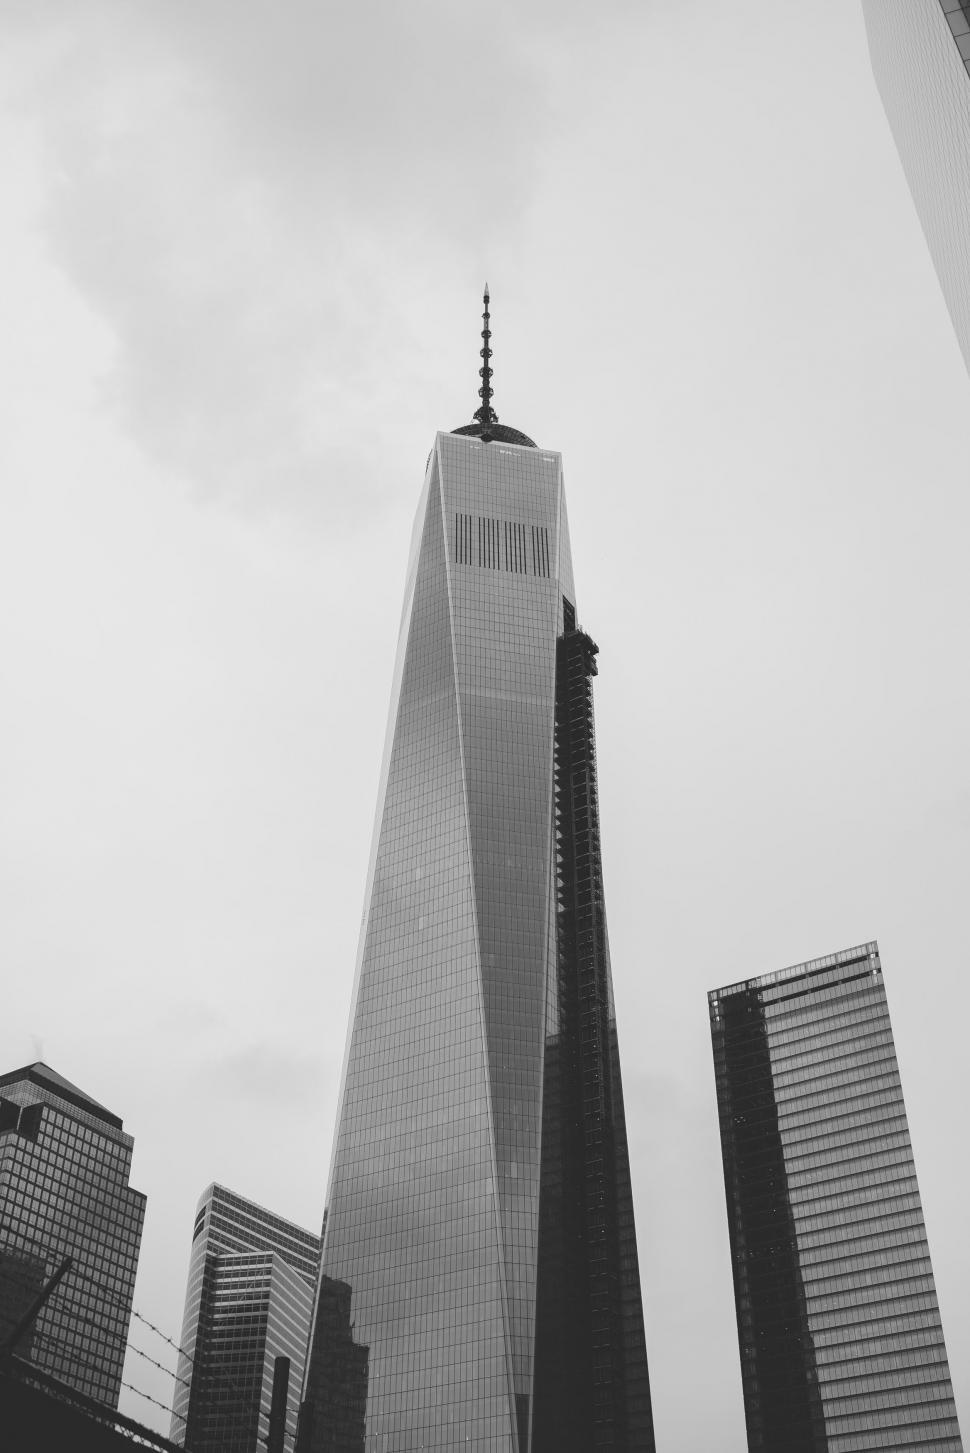 Free Image of Monochrome skyscraper towering over city 